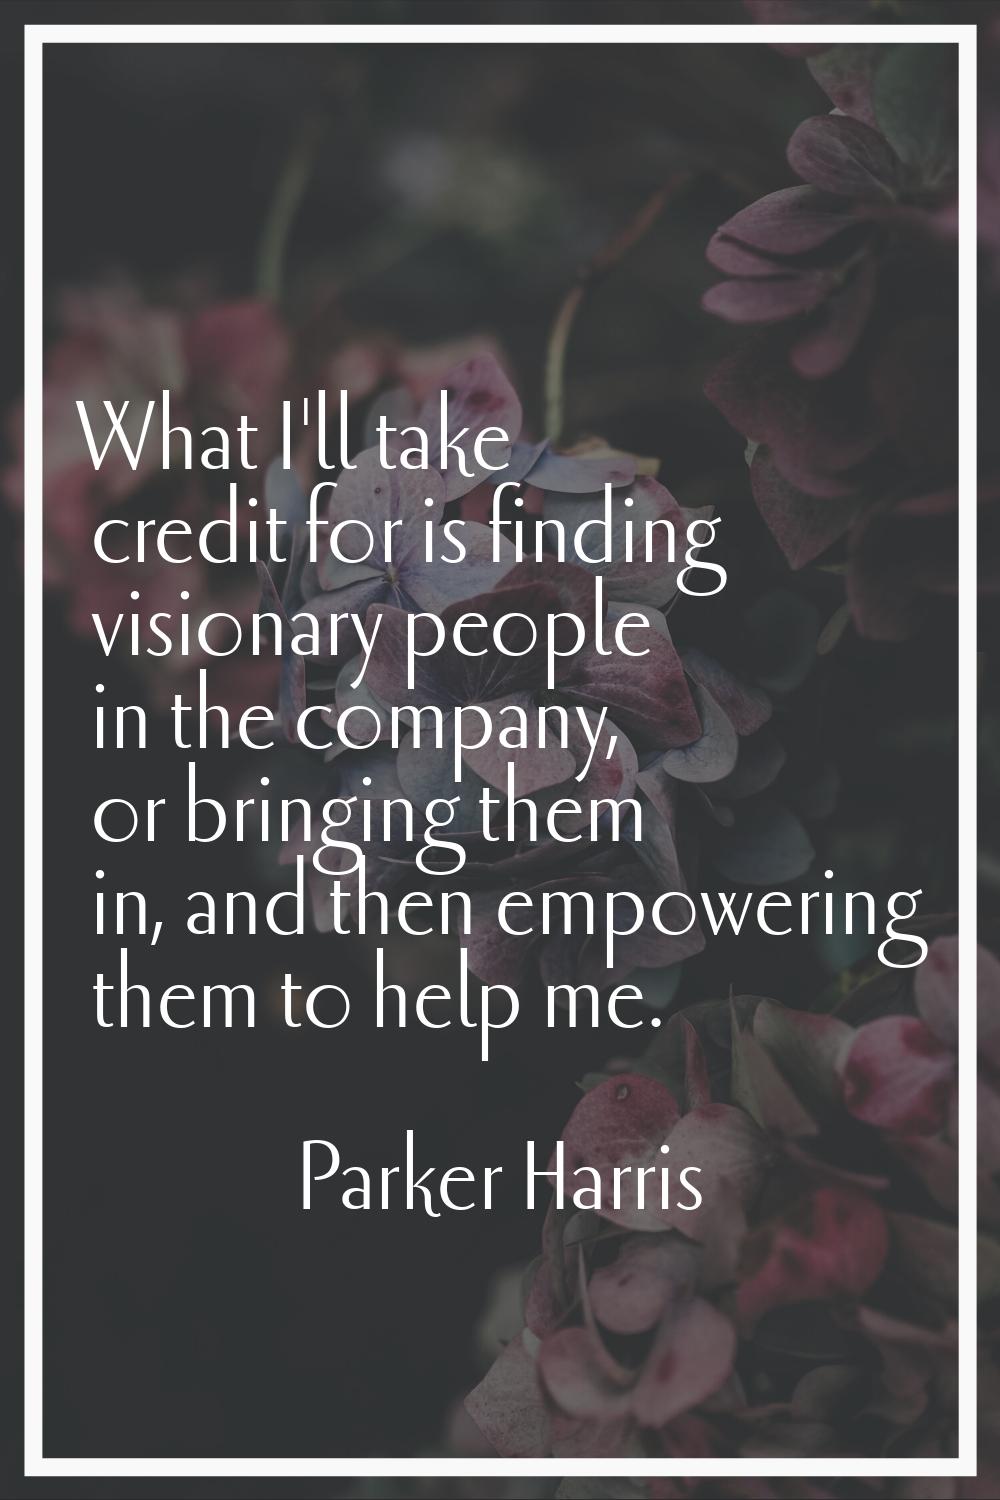 What I'll take credit for is finding visionary people in the company, or bringing them in, and then